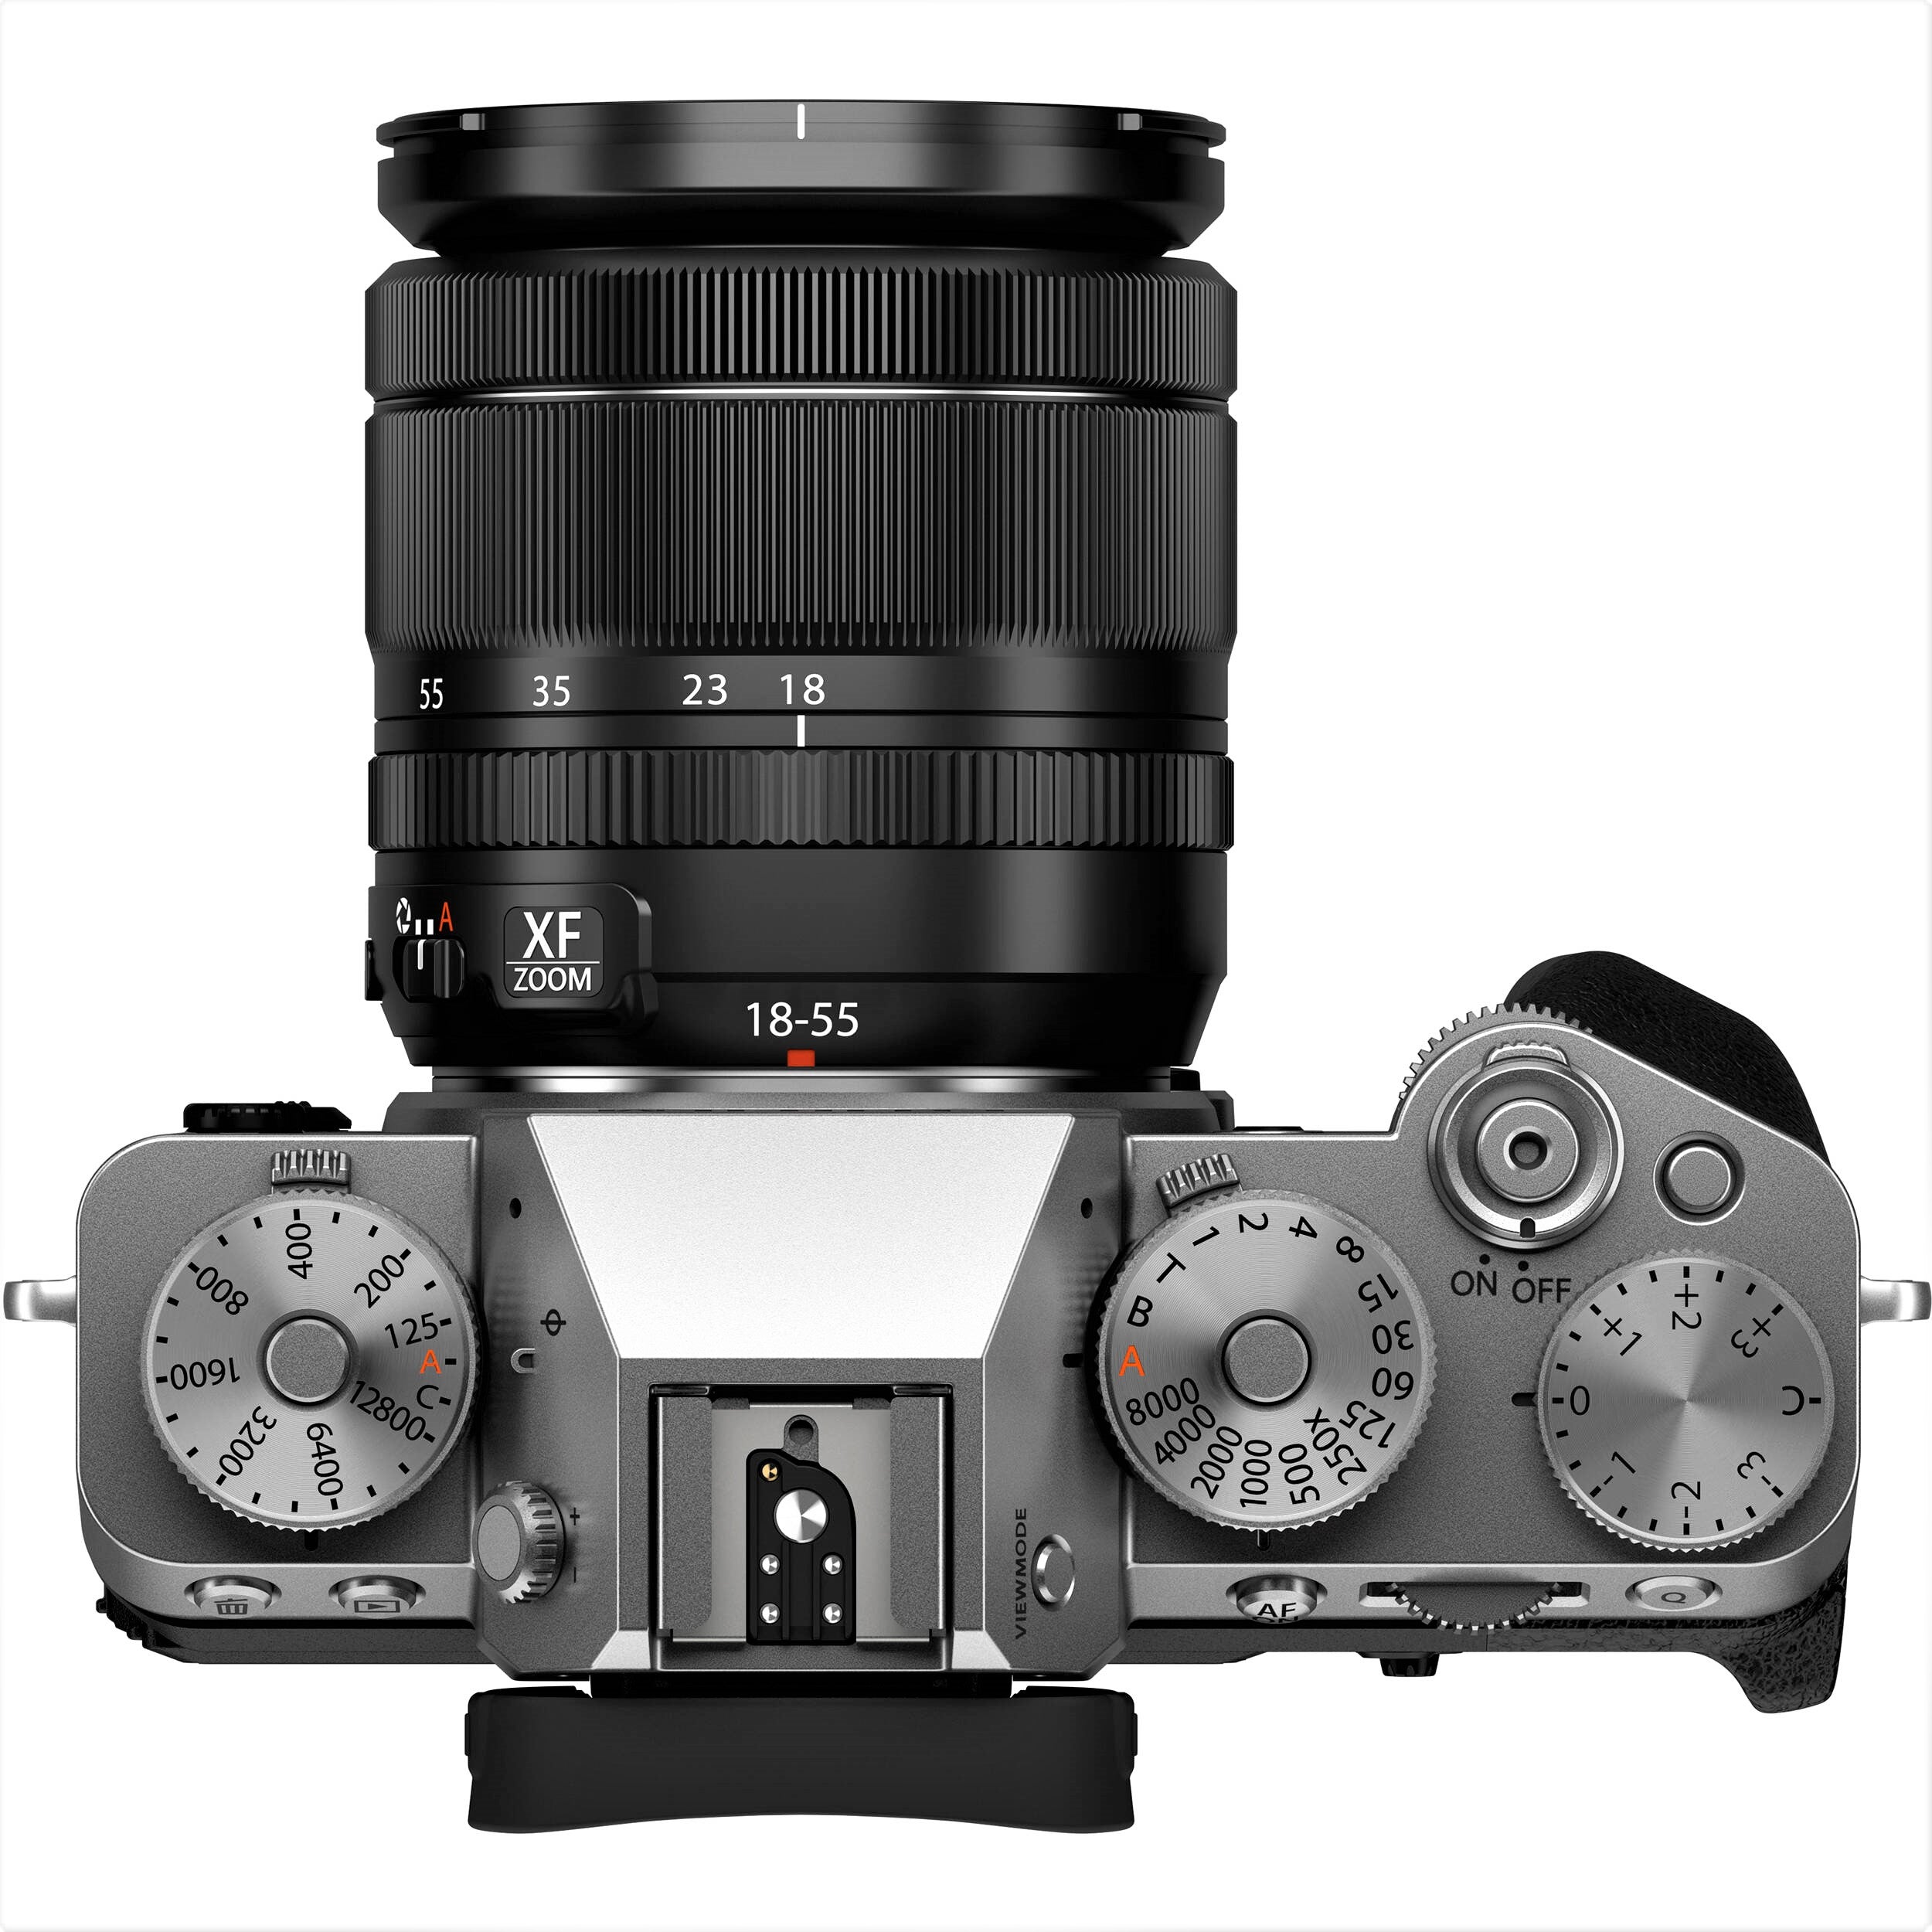 Fujifilm X-T5 Mirrorless Camera with 18-55mm Lens (Silver) - Top View